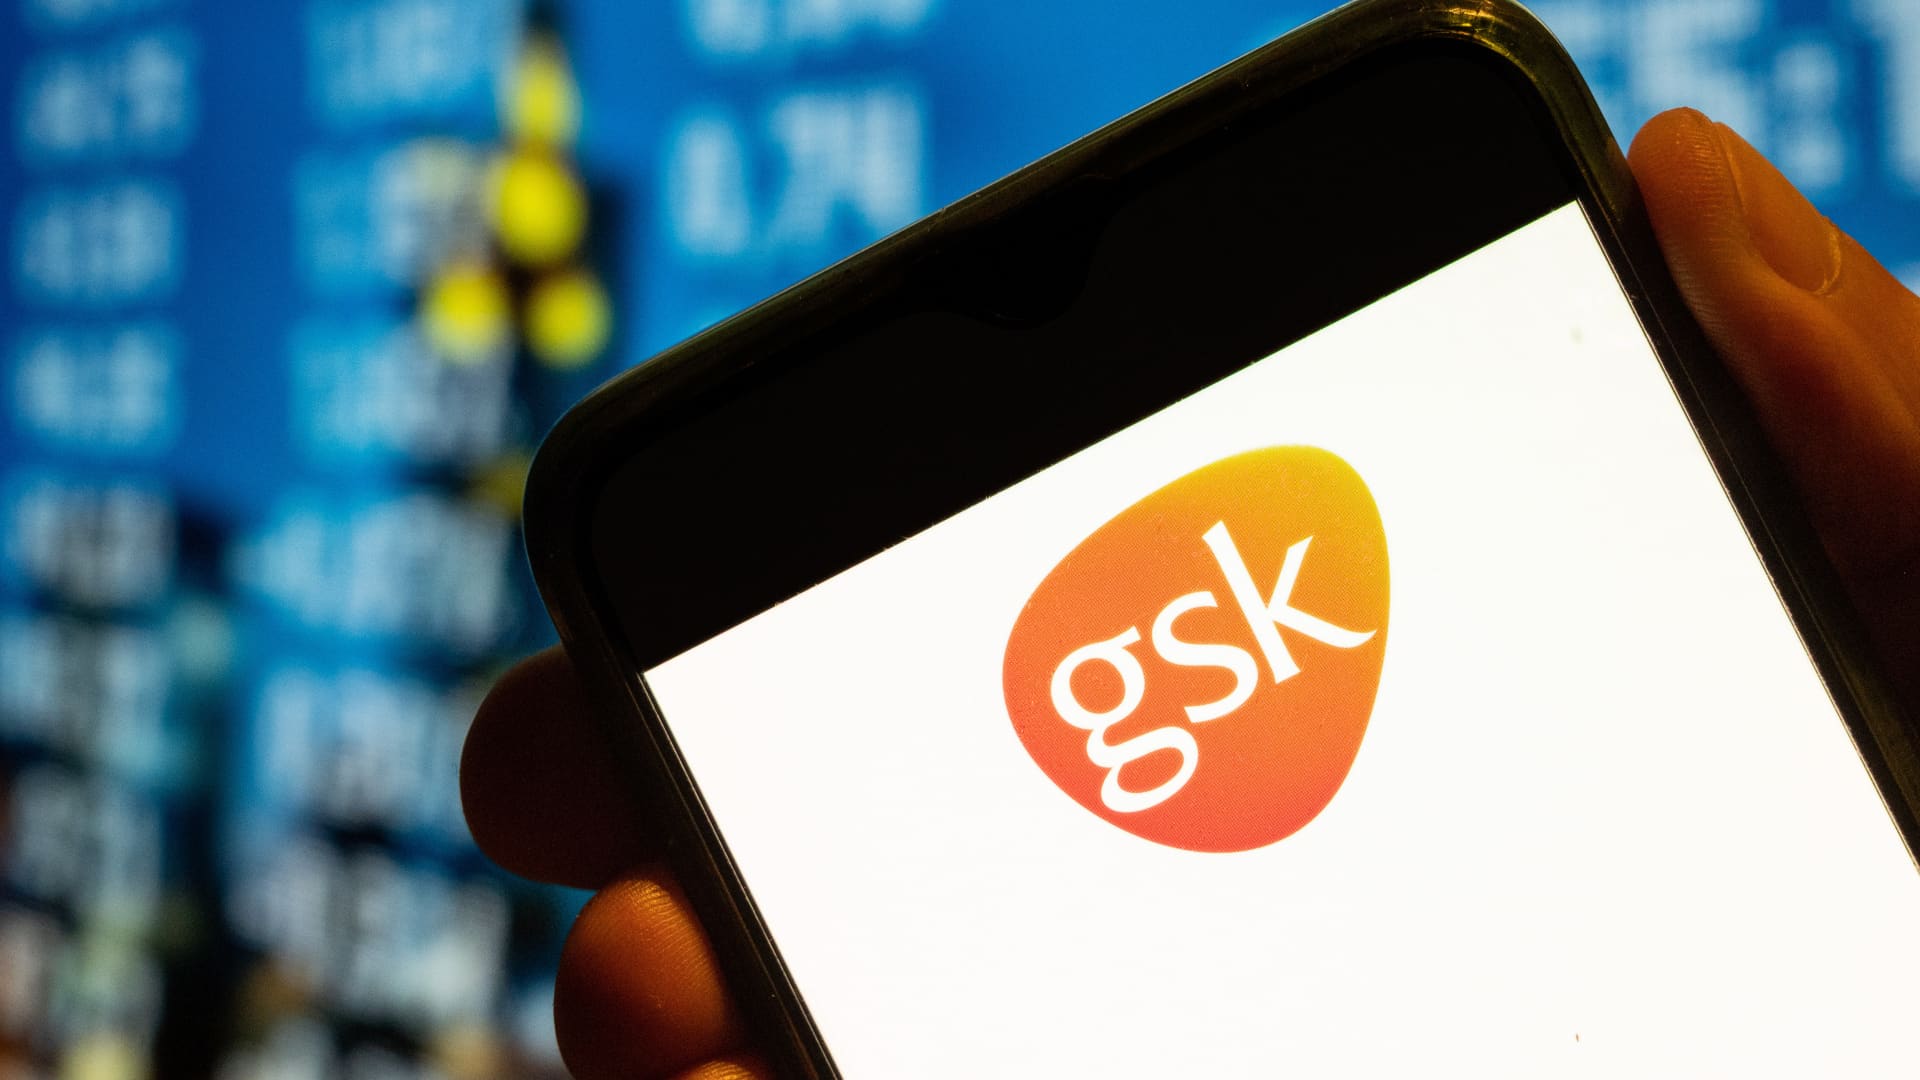 GSK chief says RSV vaccine will start off slower than shingles shot – but will drive future sales